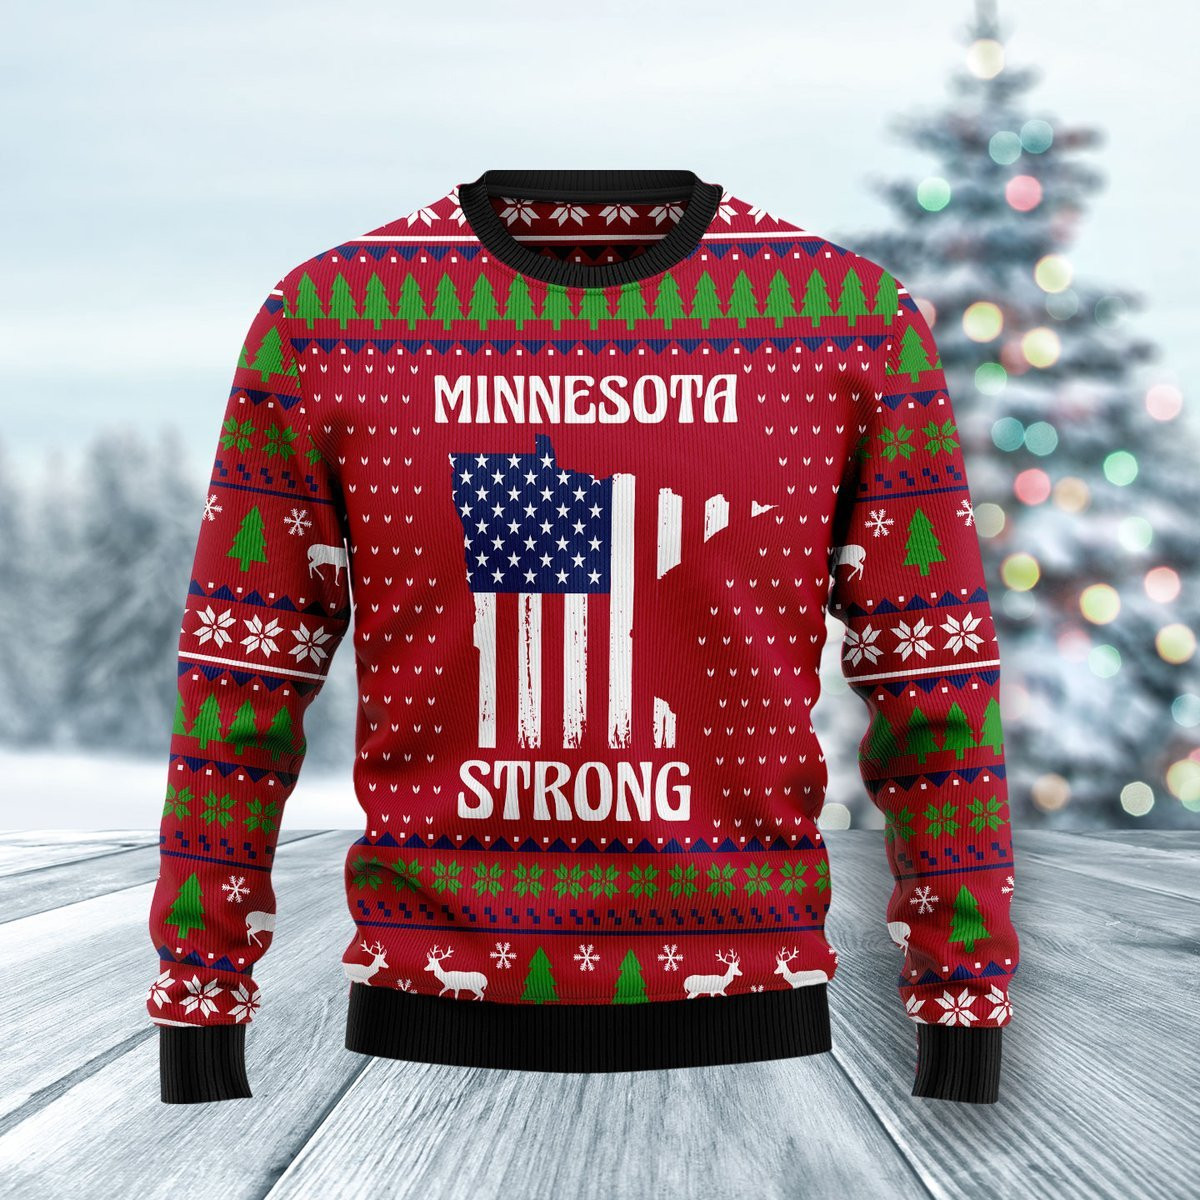 Minnesota Strong Ugly Christmas Sweater Ugly Sweater For Men Women, Holiday Sweater